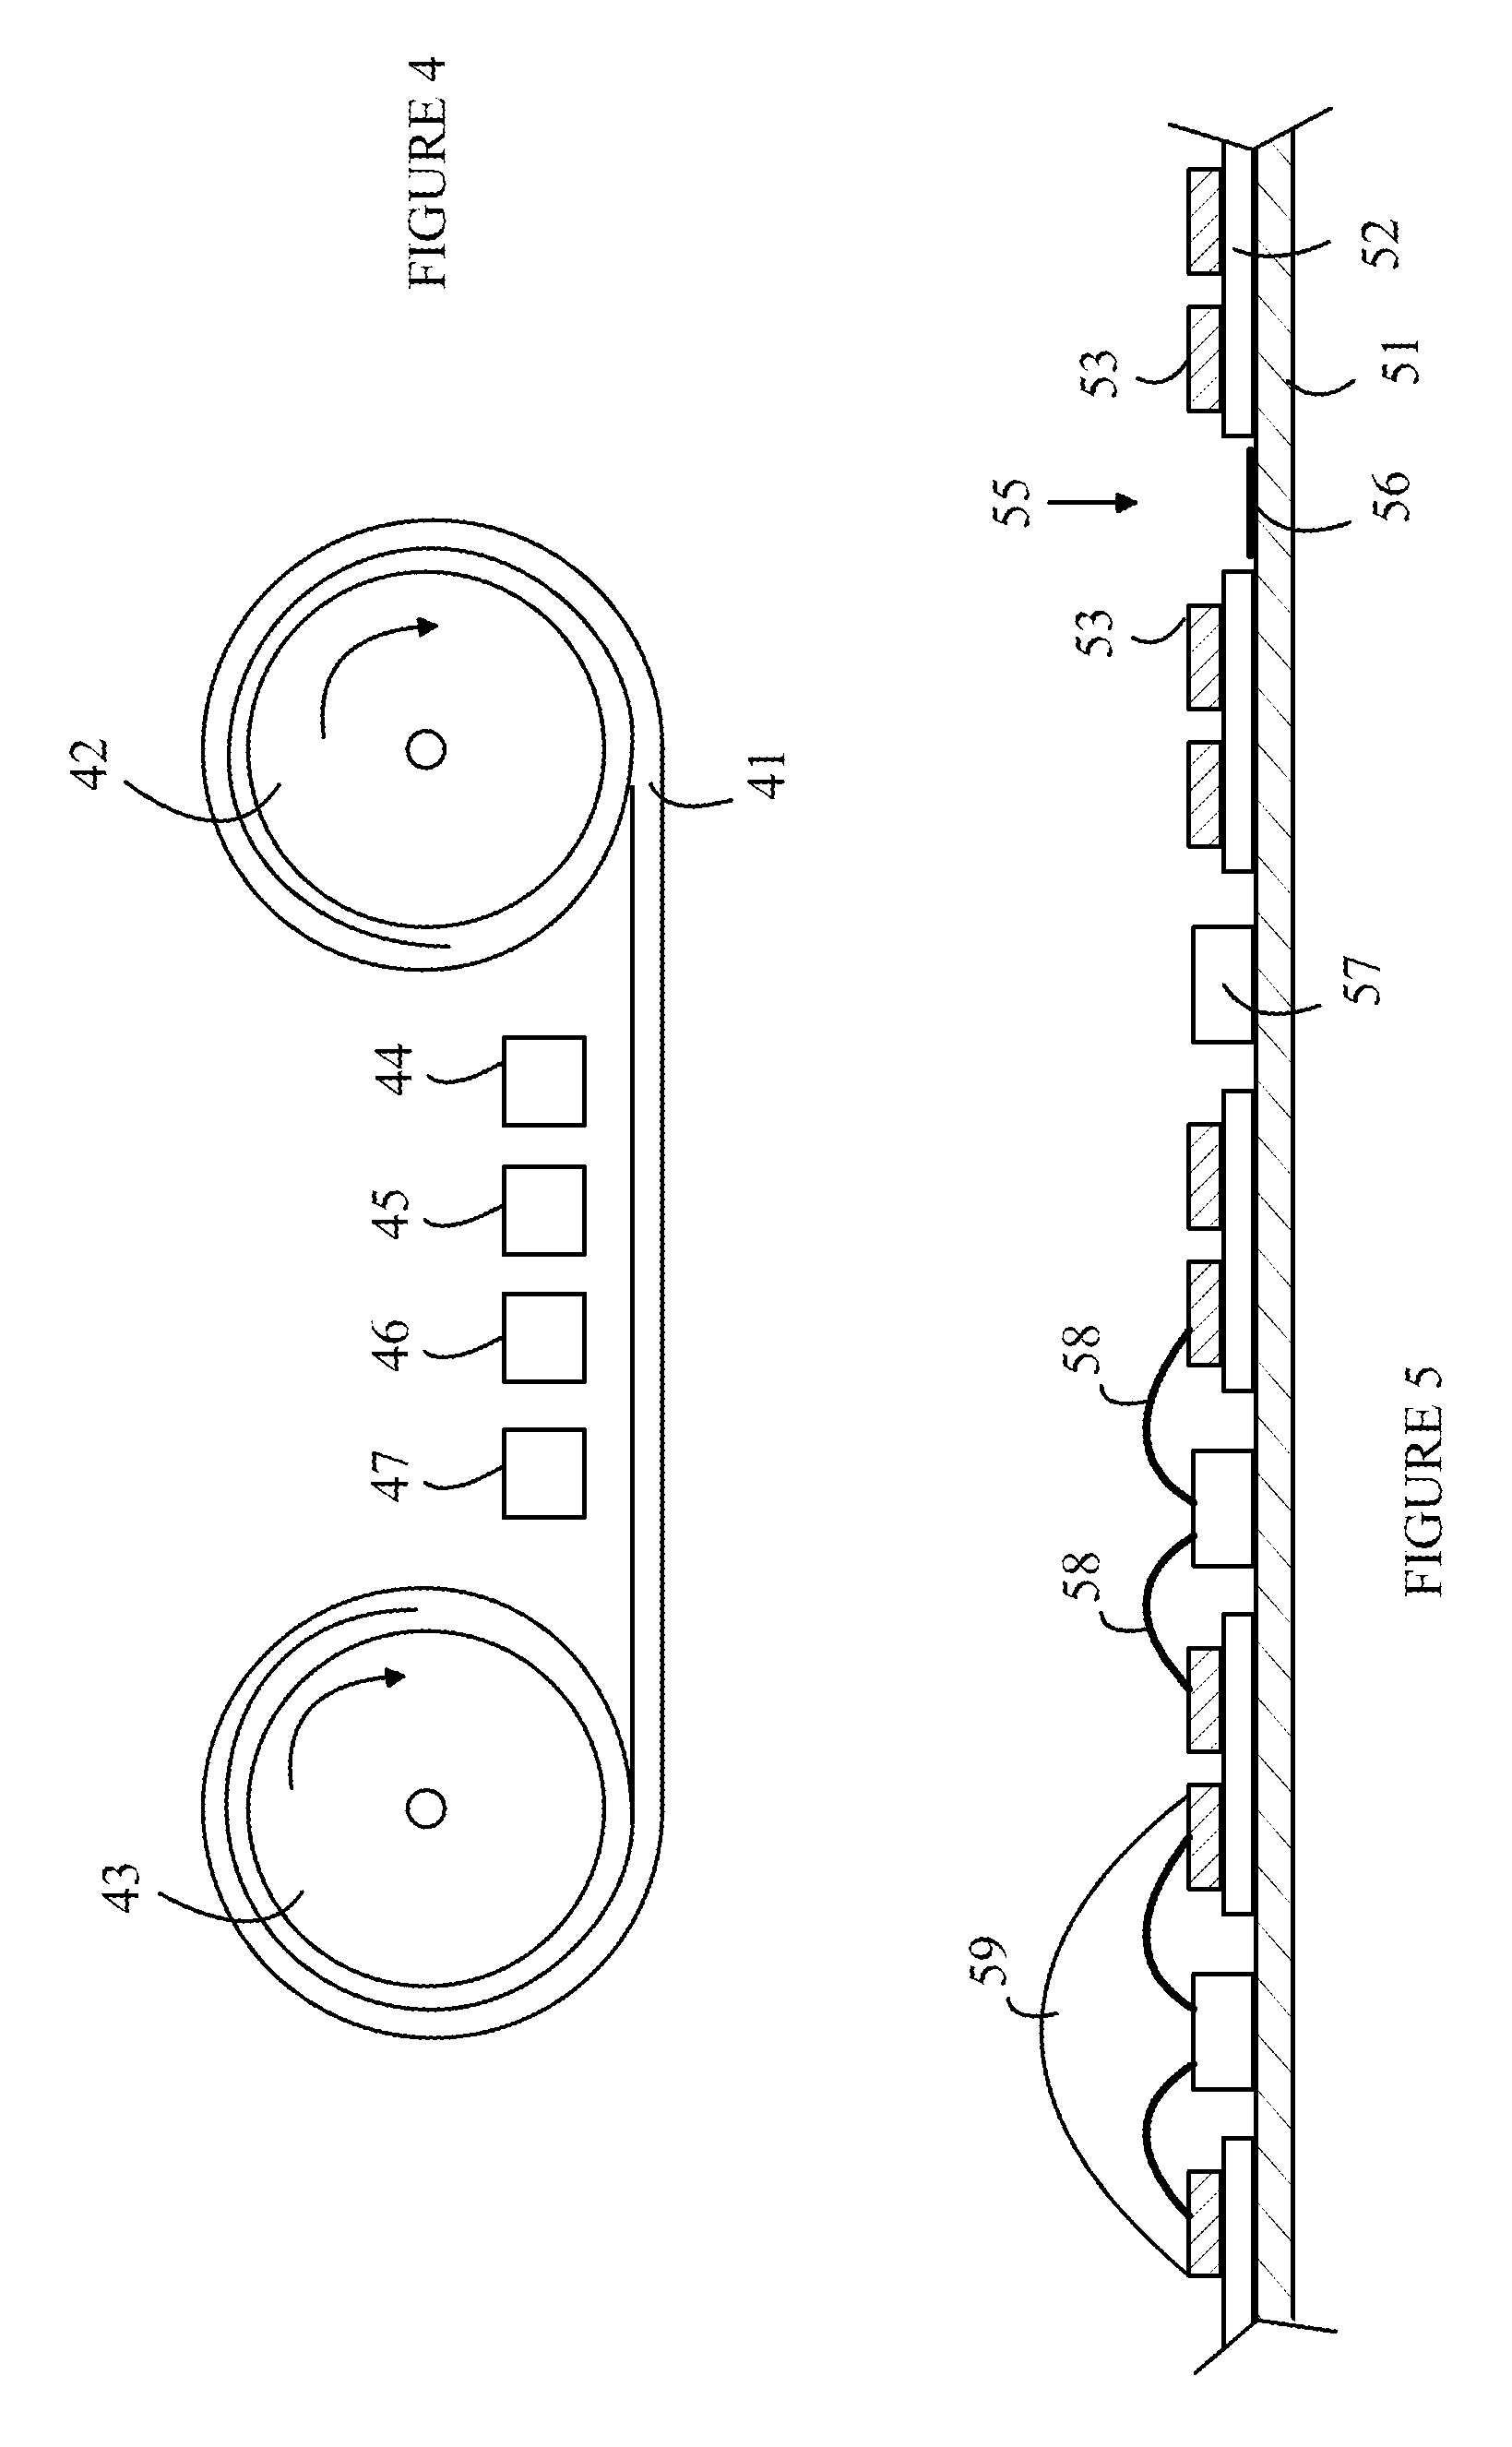 Flexible distributed LED-based light source and method for making the same